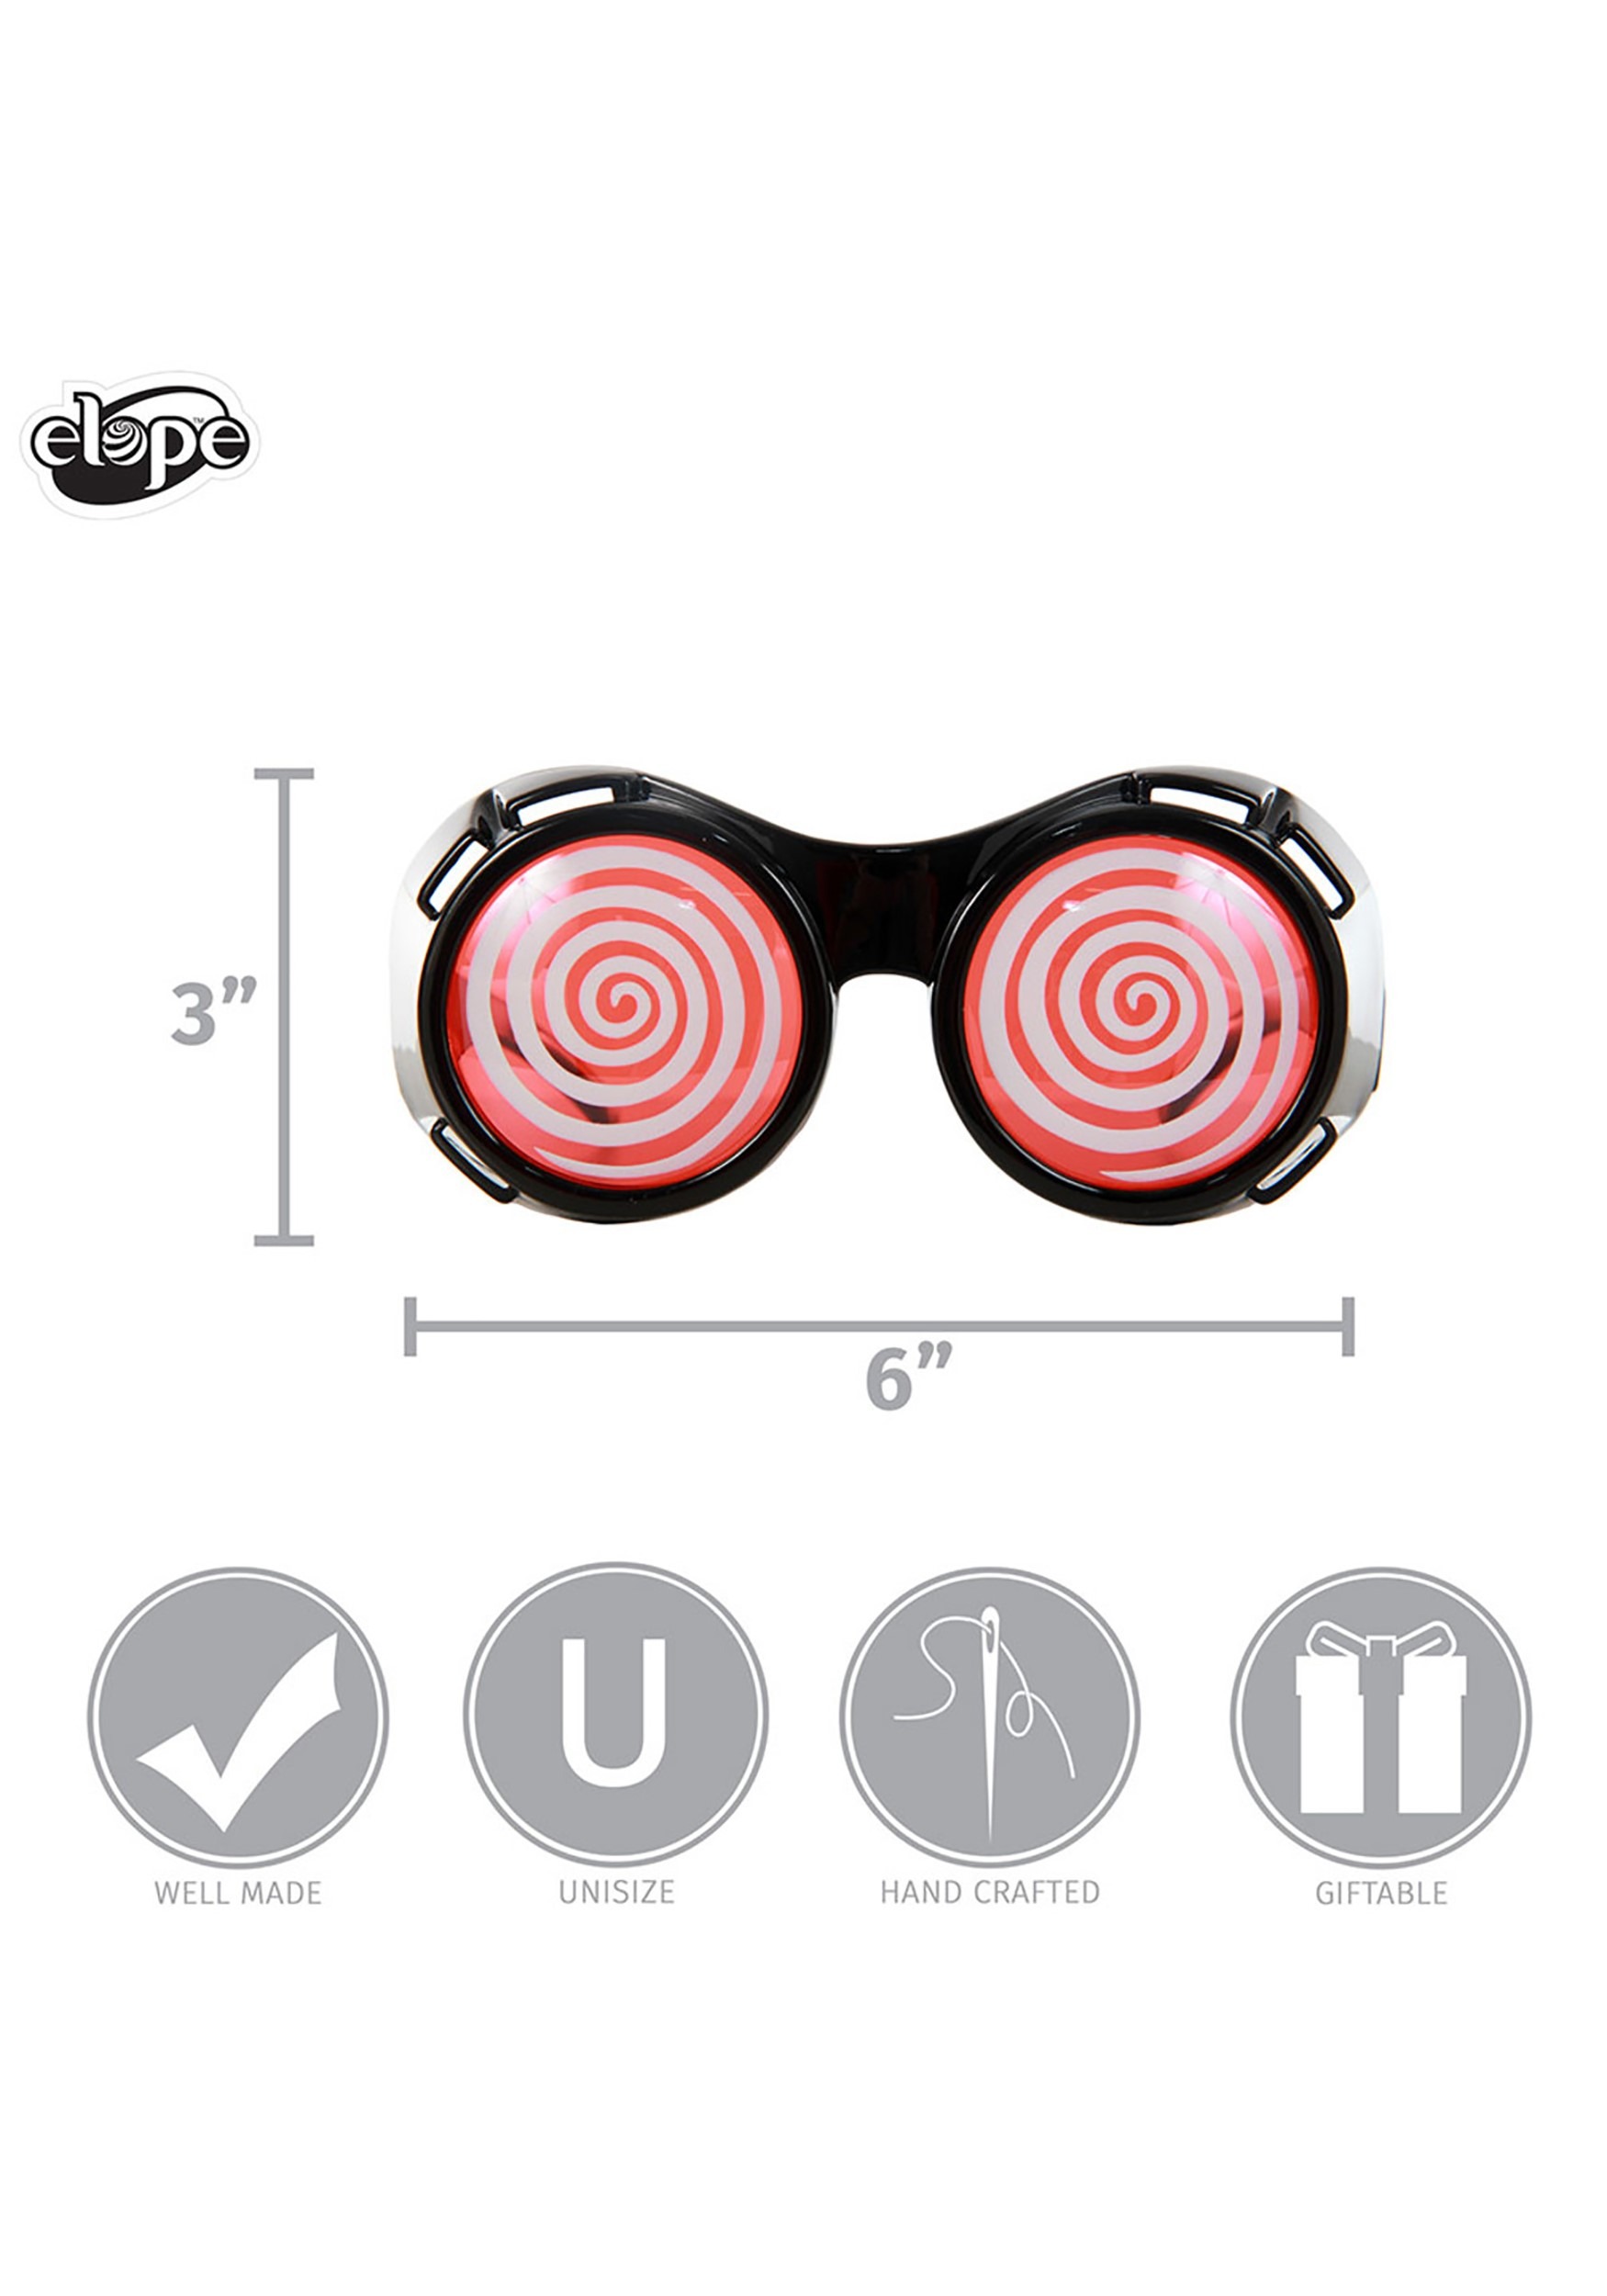 X-Ray Goggles Black & Red